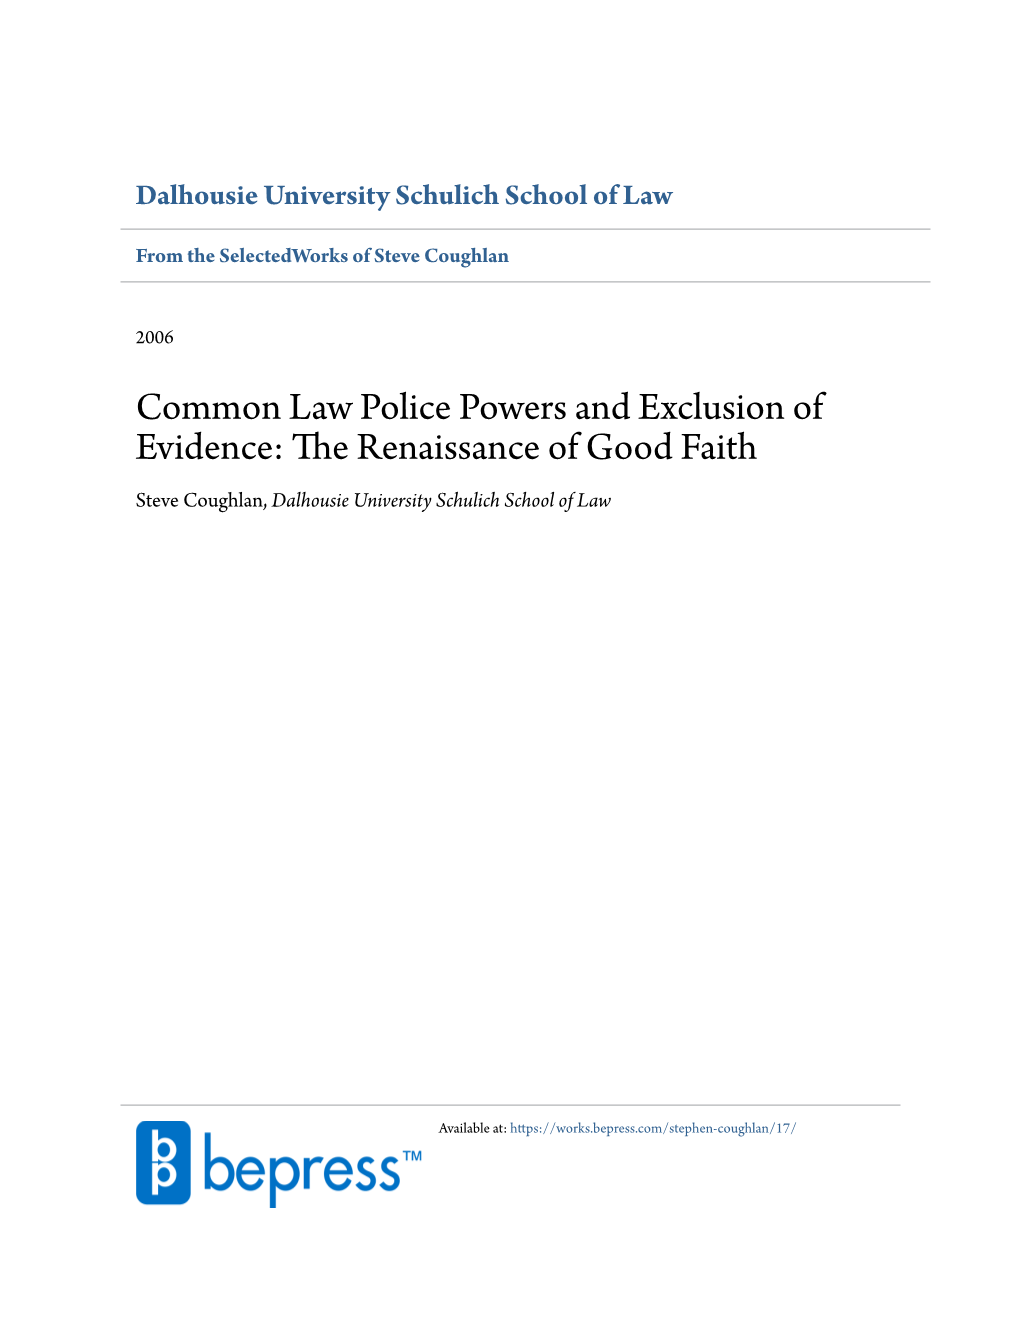 Common Law Police Powers and Exclusion of Evidence: the Renaissance of Good Faith Steve Coughlan, Dalhousie University Schulich School of Law